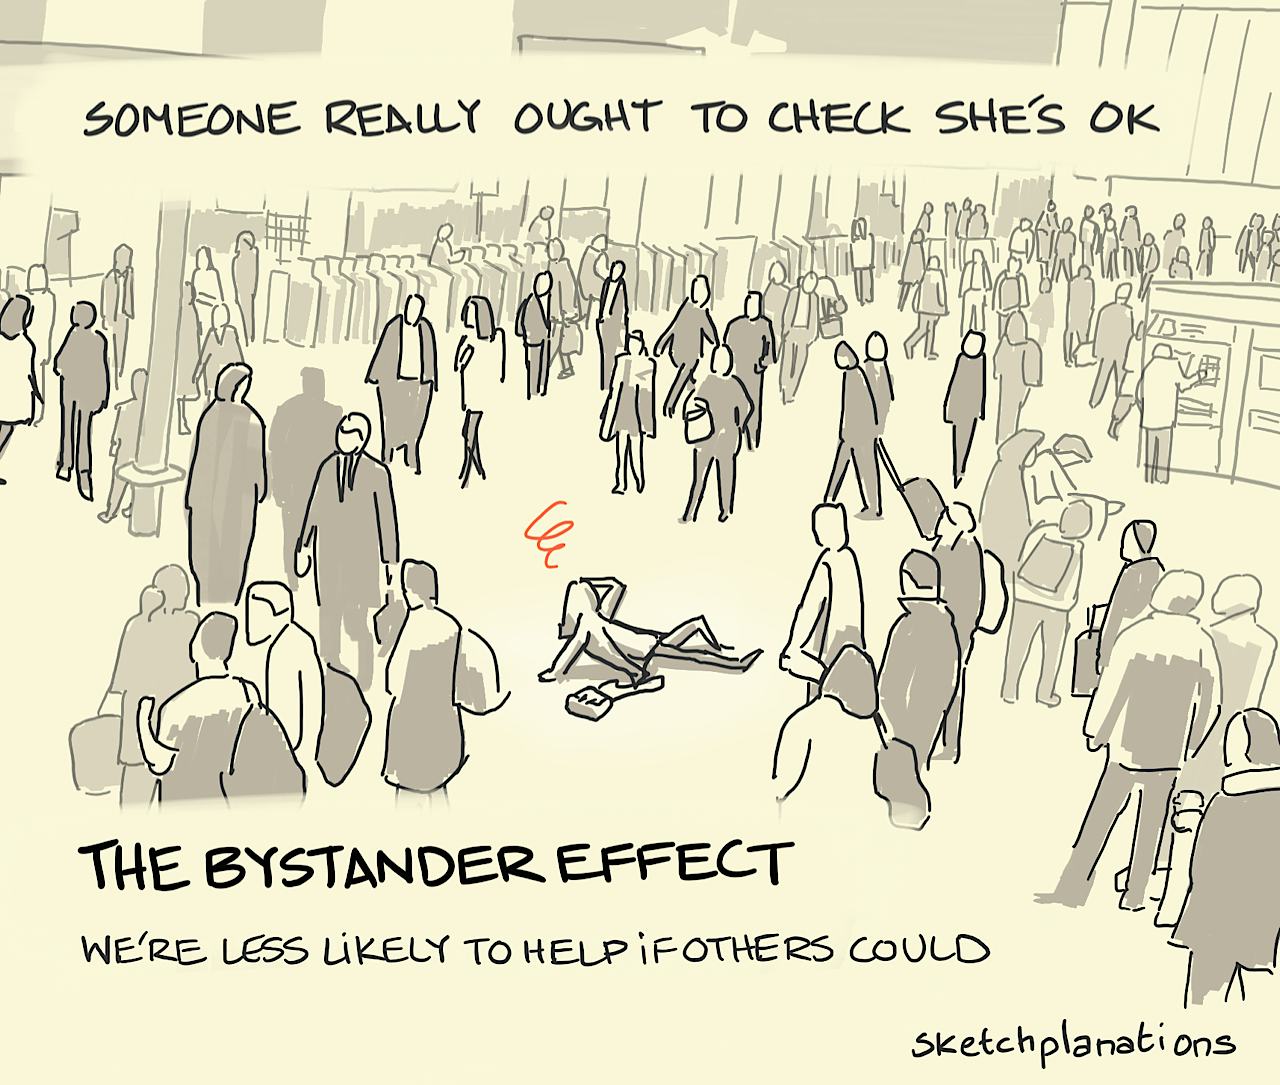 The bystander effect: a lady sits dazed on the floor in a busy train station while others ignore her or walk on by — someone really ought to check she's ok